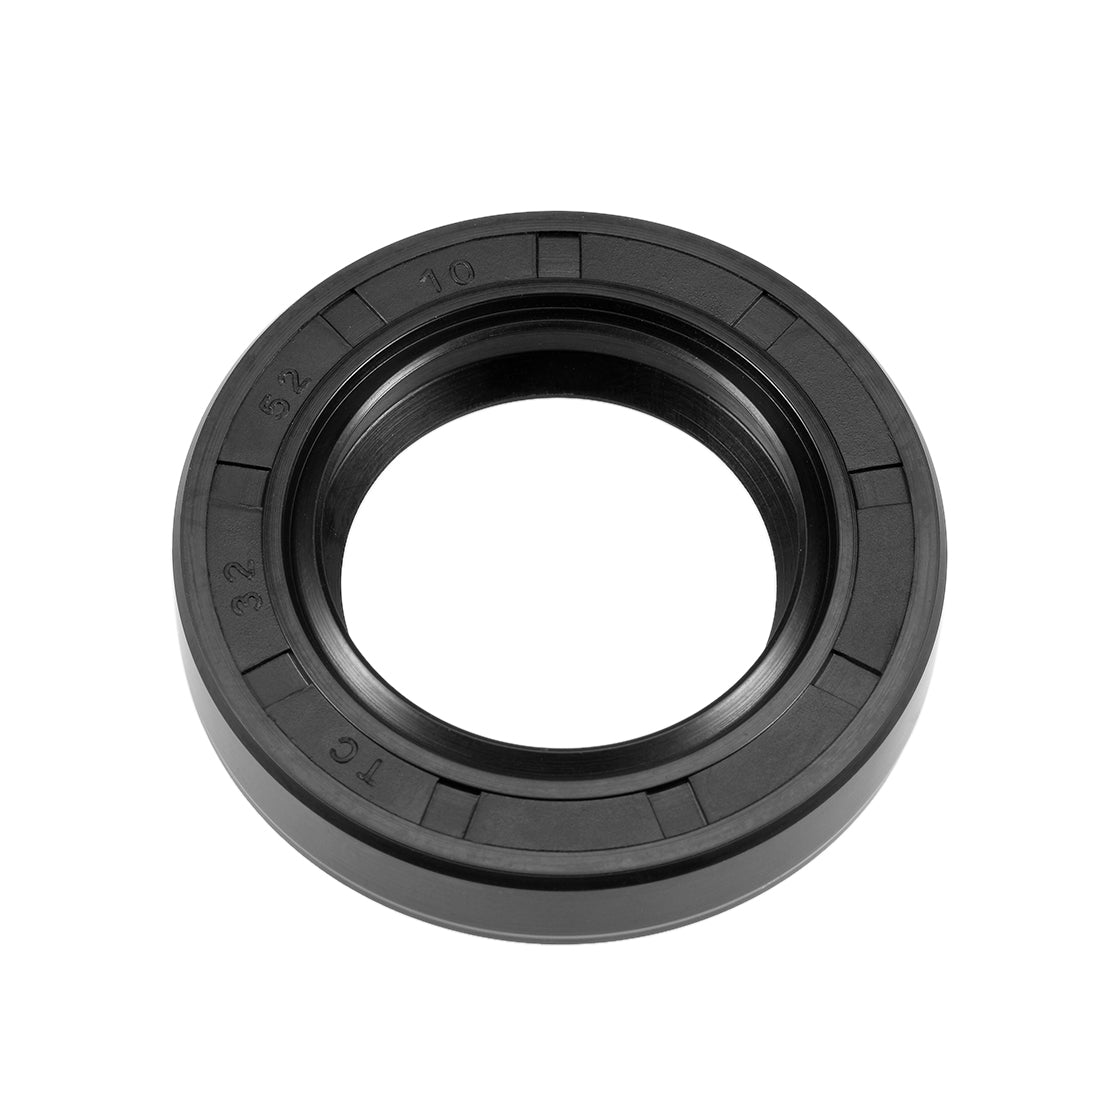 Uxcell Uxcell Oil Seal, TC 36mm x 56mm x 10mm, Nitrile Rubber Cover Double Lip